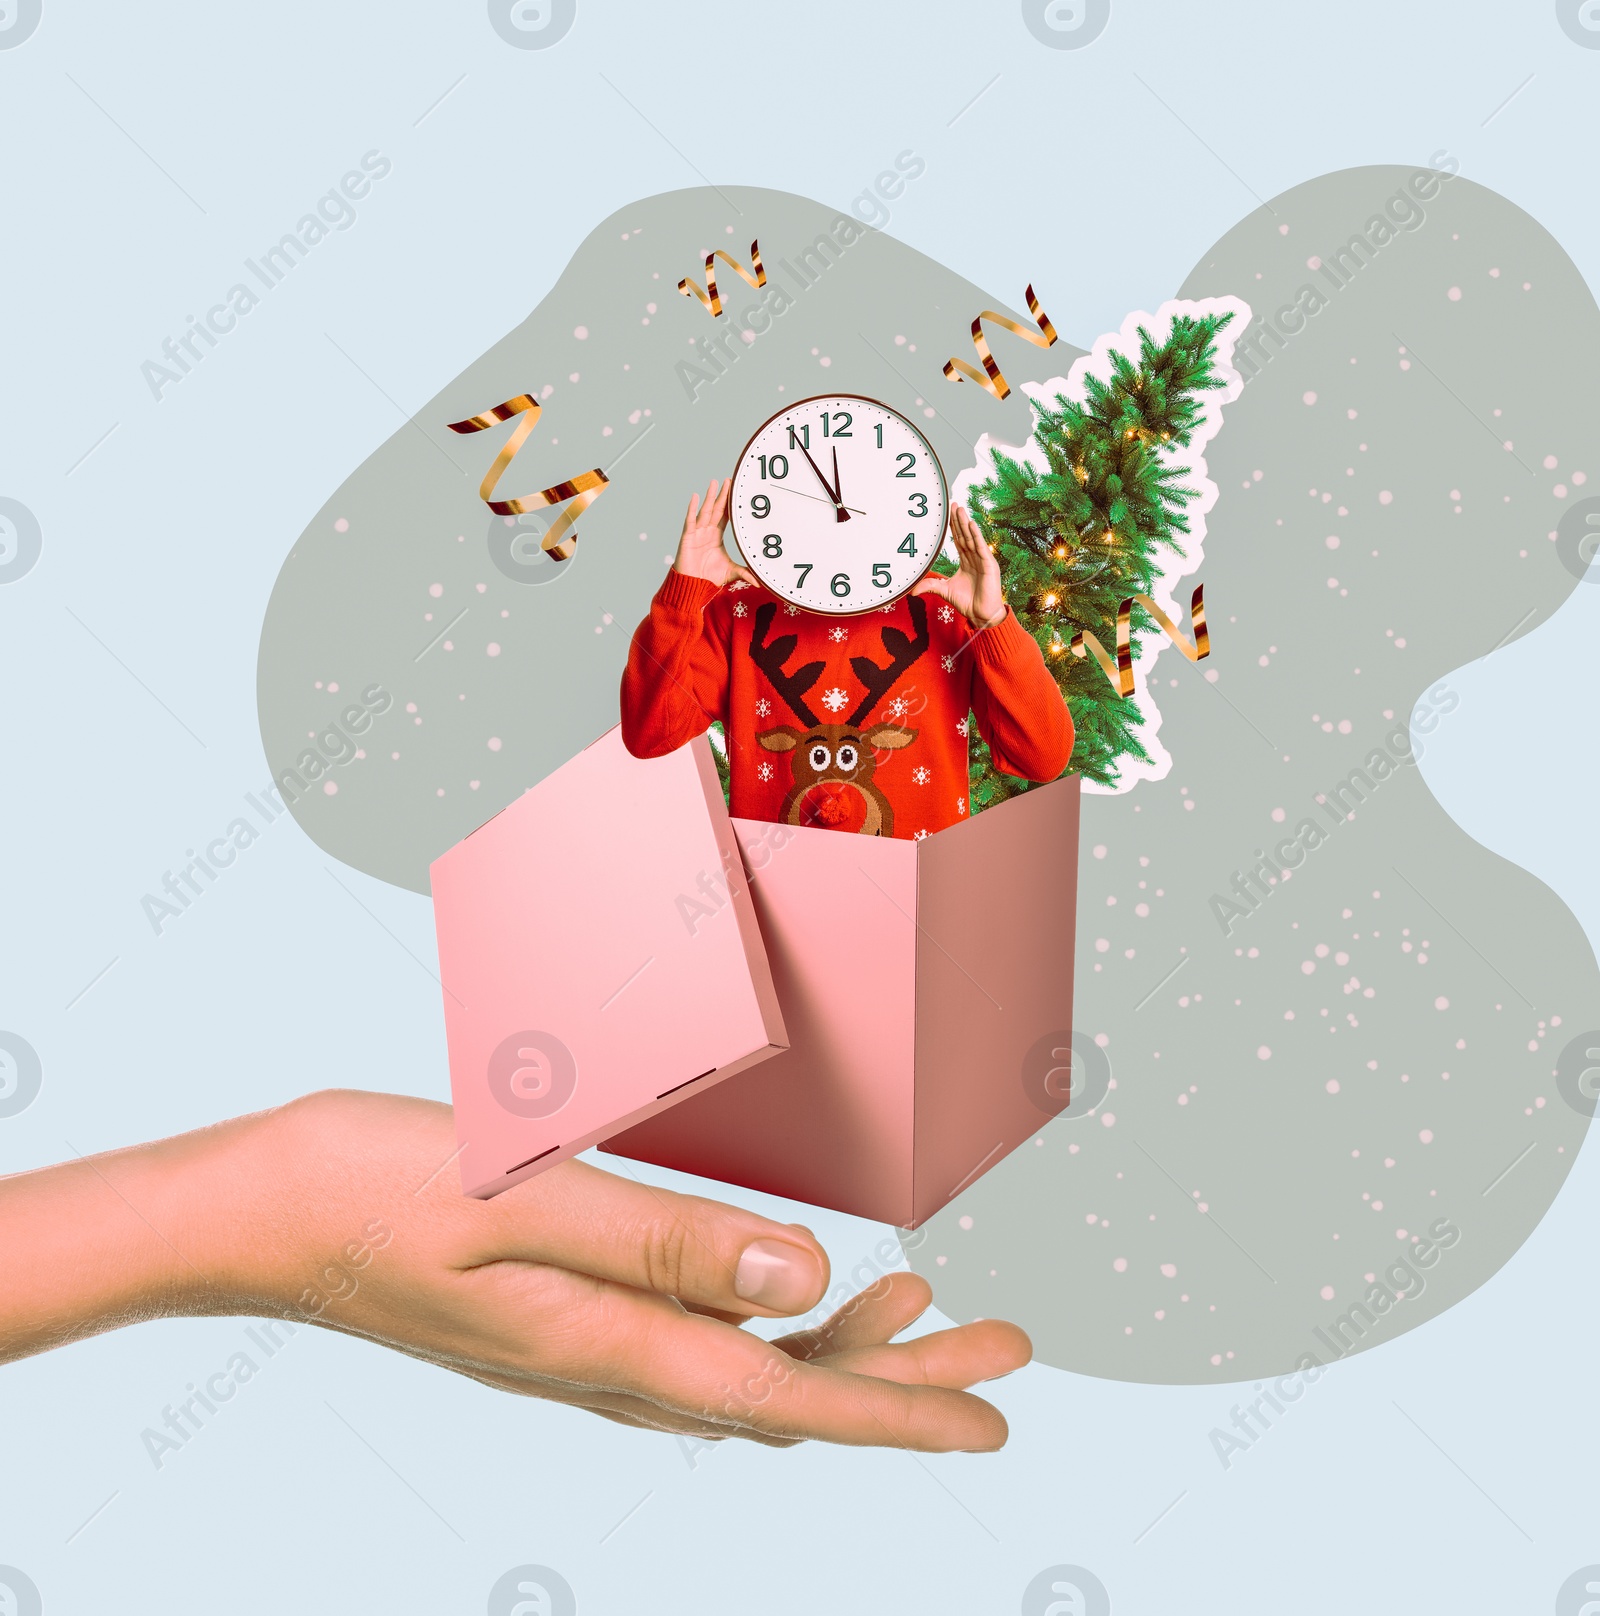 Image of Christmas art collage. Man with clock head and fir tree popping out of gift box on woman's hand against color background